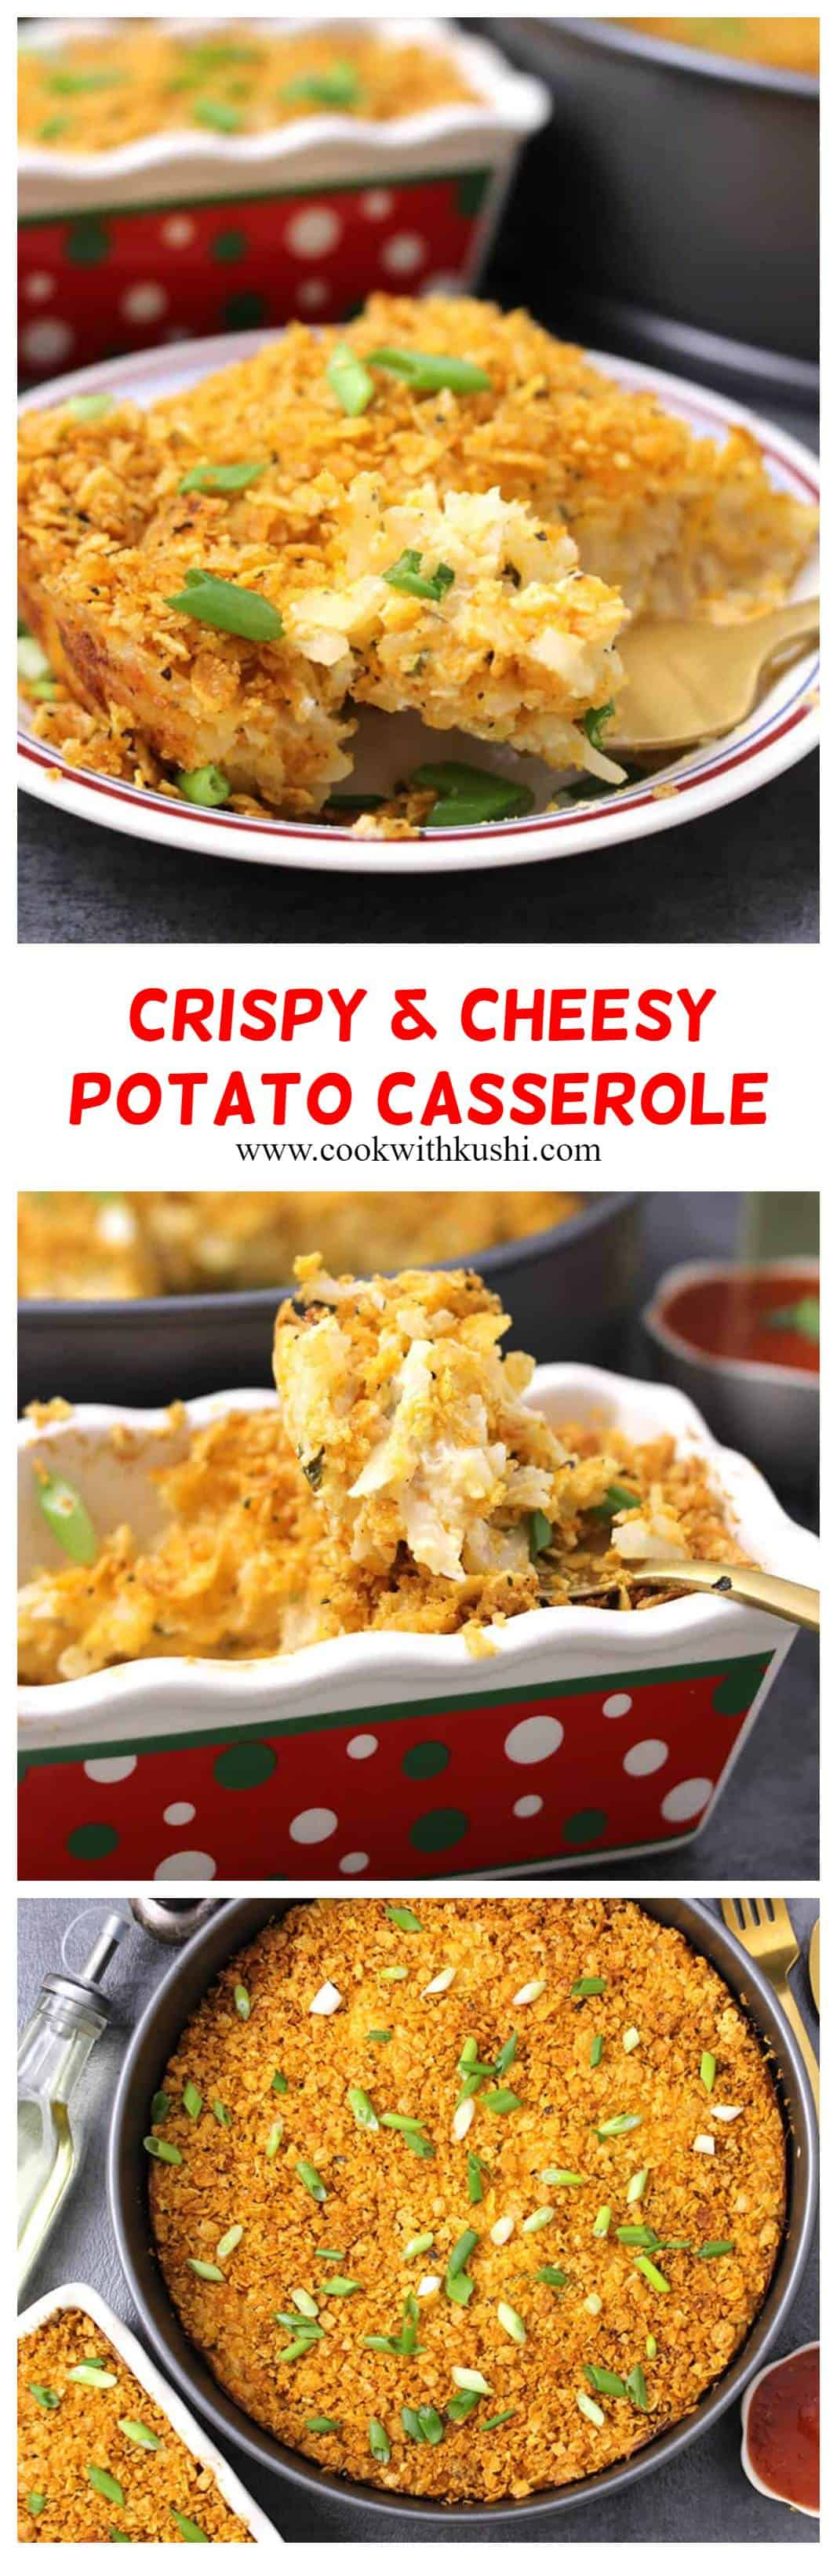 Cheesy Potato Casserole is a crowd pleaser, super simple potato recipe that you can prepare this Thanksgiving or Christmas. Its creamy and cheesy with a cripsy topping. In short this recipe is comfort food at its best. The best and classic casserole recipe you will prepare for lunch and / or dinner #potatorecipes #potatosidedishes #eassycasserole #dinnercasserole #funeralpotatoes #potatoes #vegetarian #cheese #breakfast #lunch #thanksgivingdinner #christmasdinner